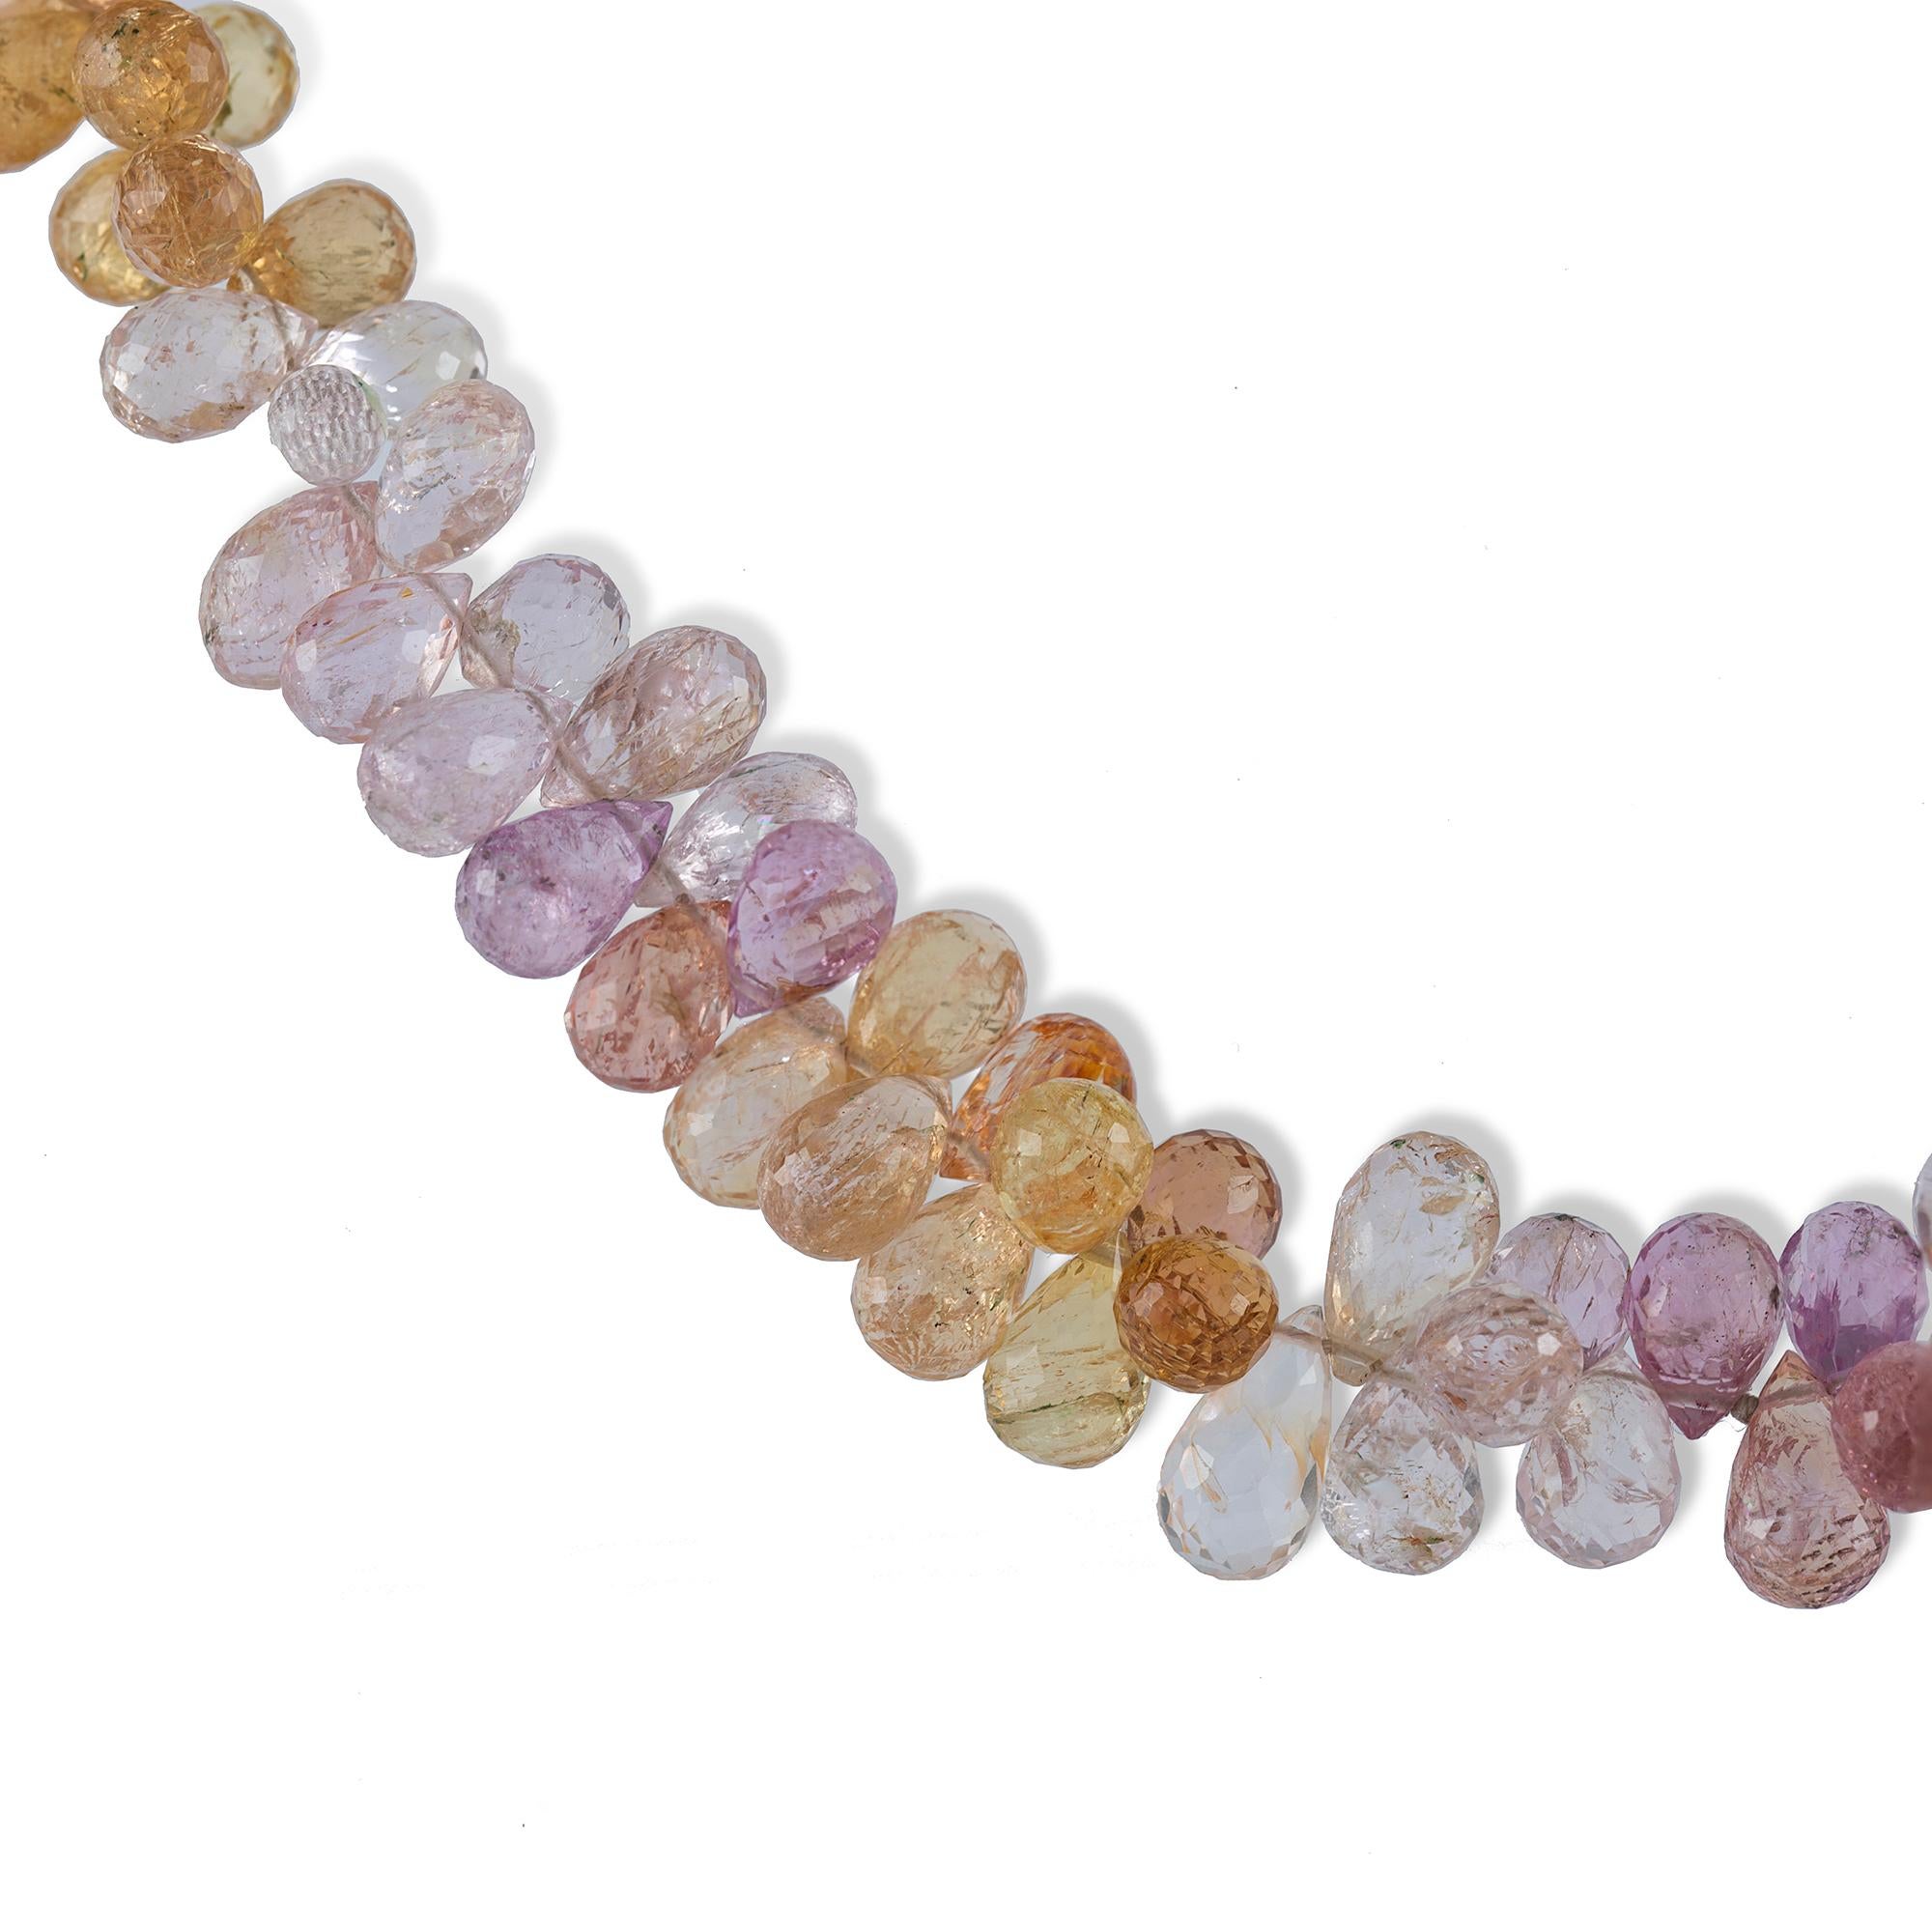 A multi-colour topaz briolette bead necklace, graduating from the centre in pink, white, yellow and orange to a 9ct yellow gold barrel clasp, gross weight 54.0 grams

This bold topaz necklace comes from the collection of Bentley & Skinner, the